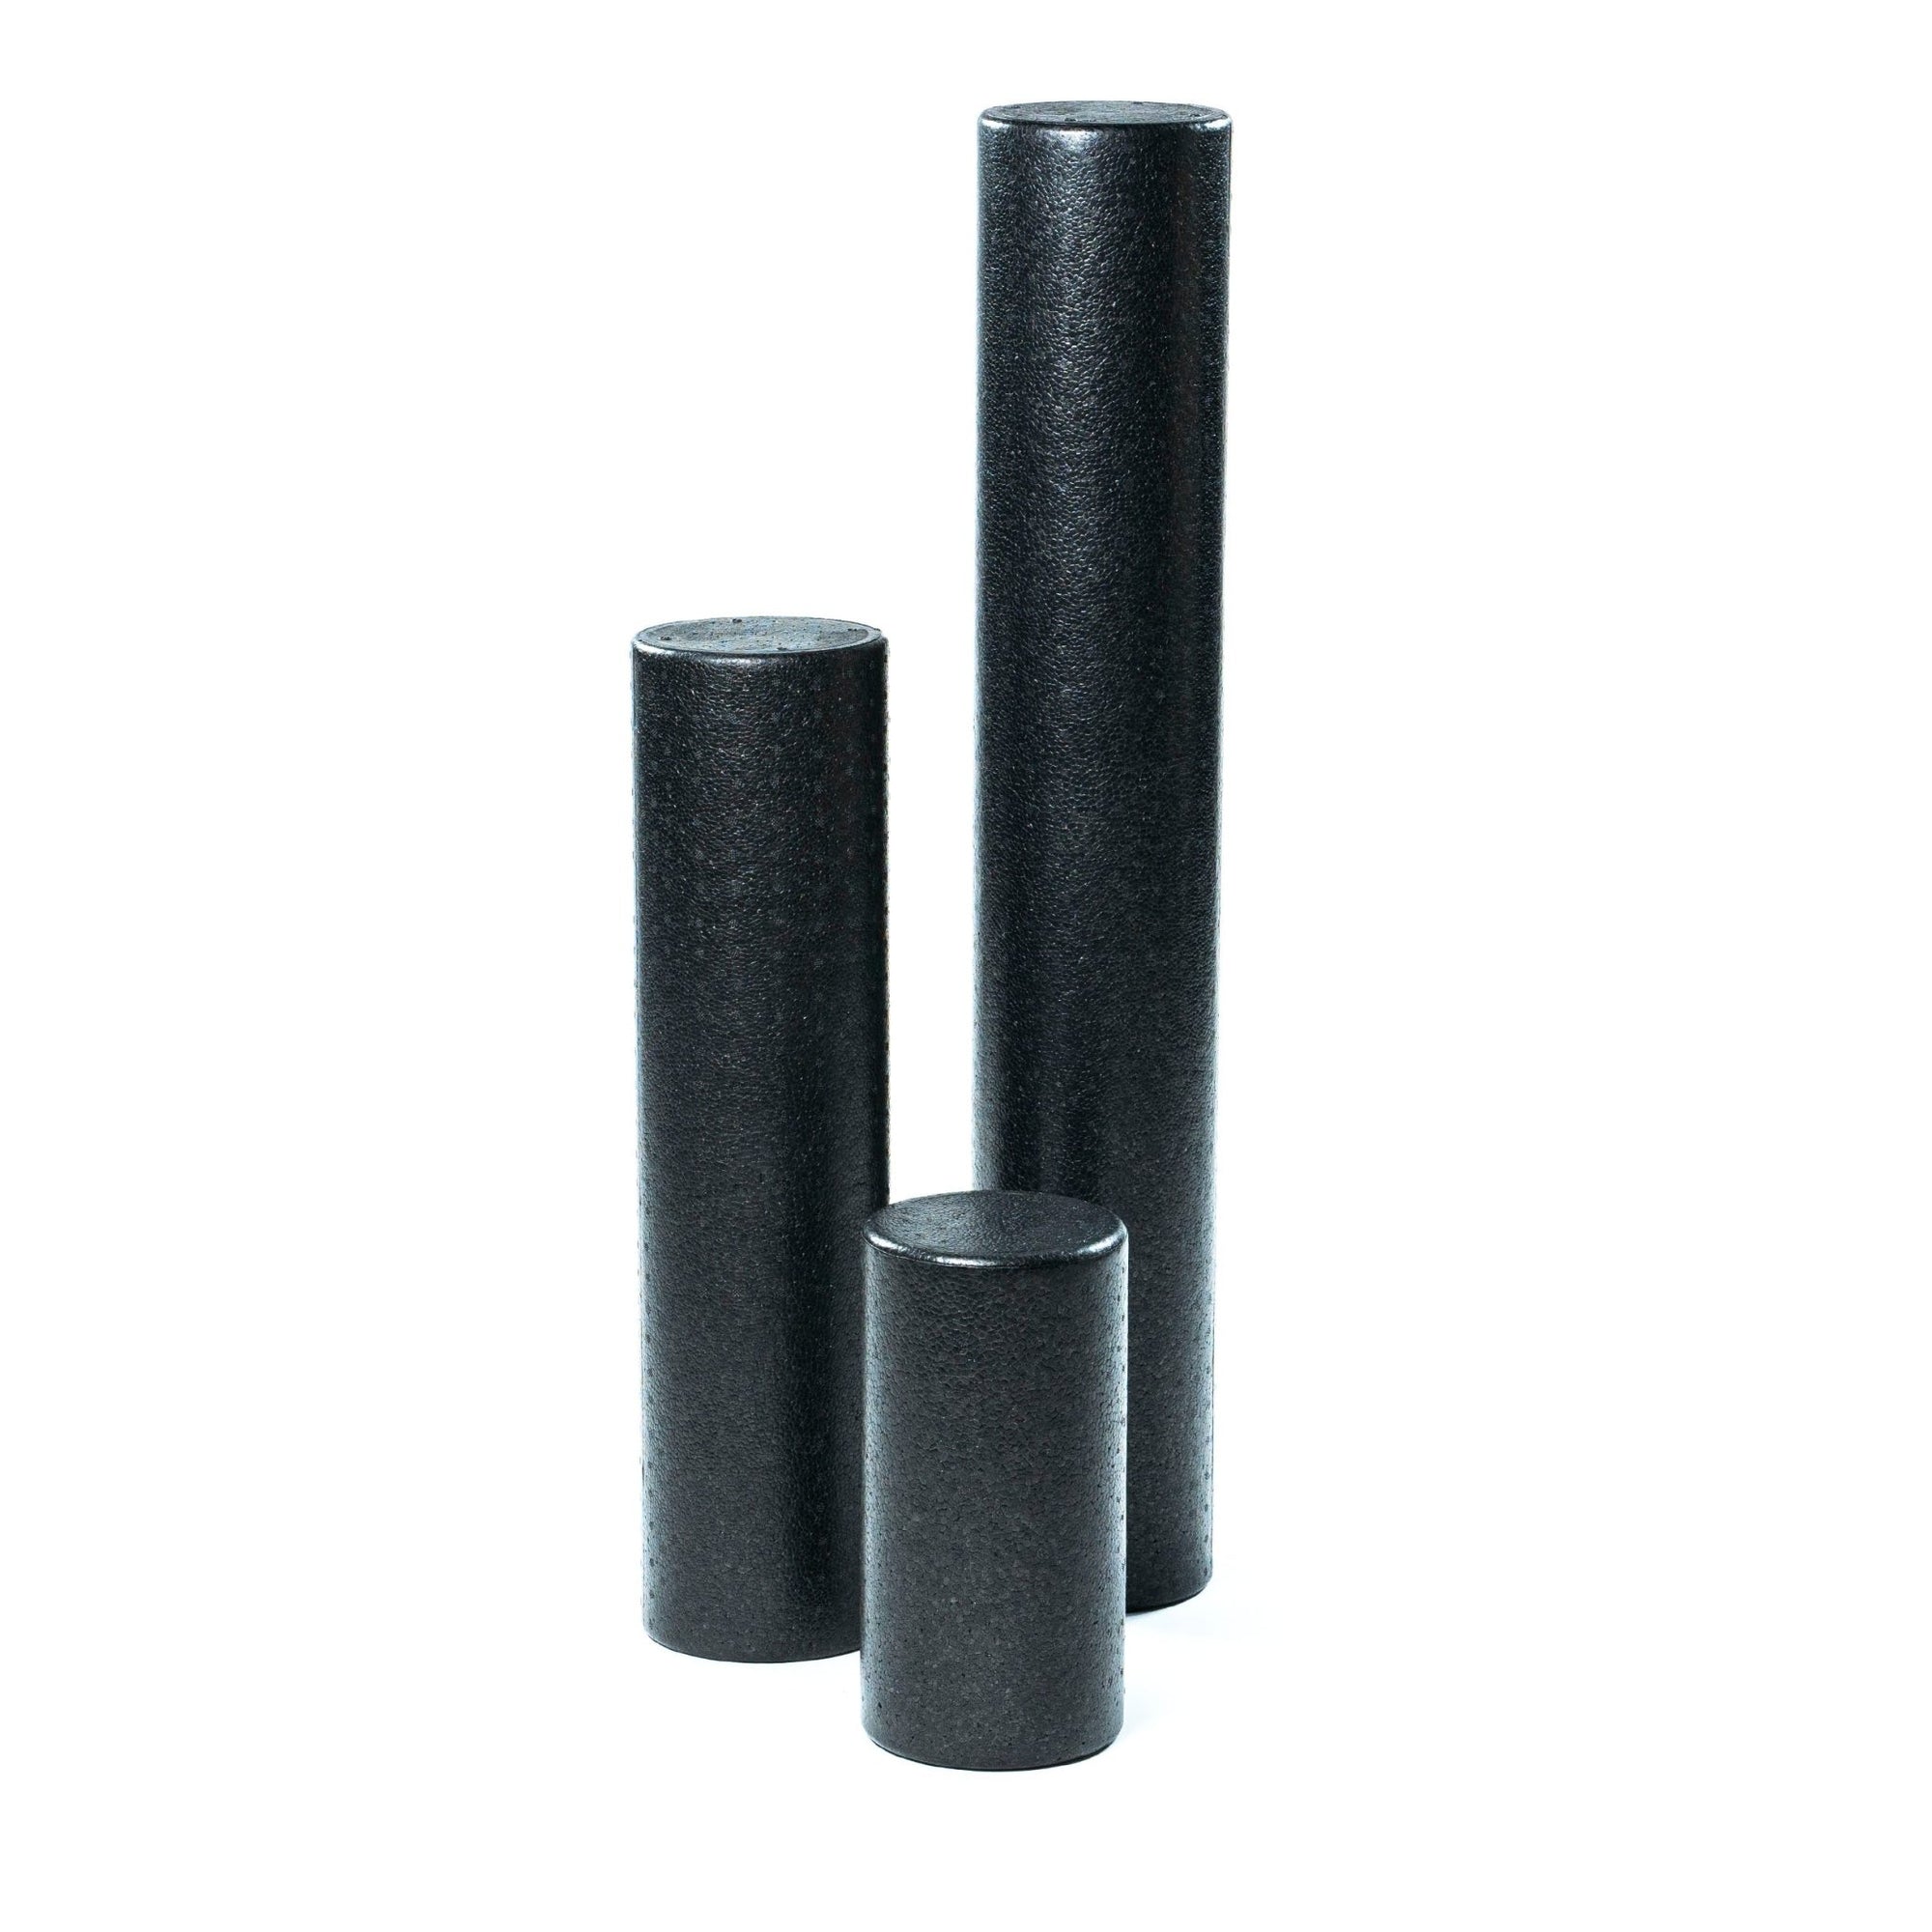 FitWay Equip. Black Foam Rollers - Fitness Experience